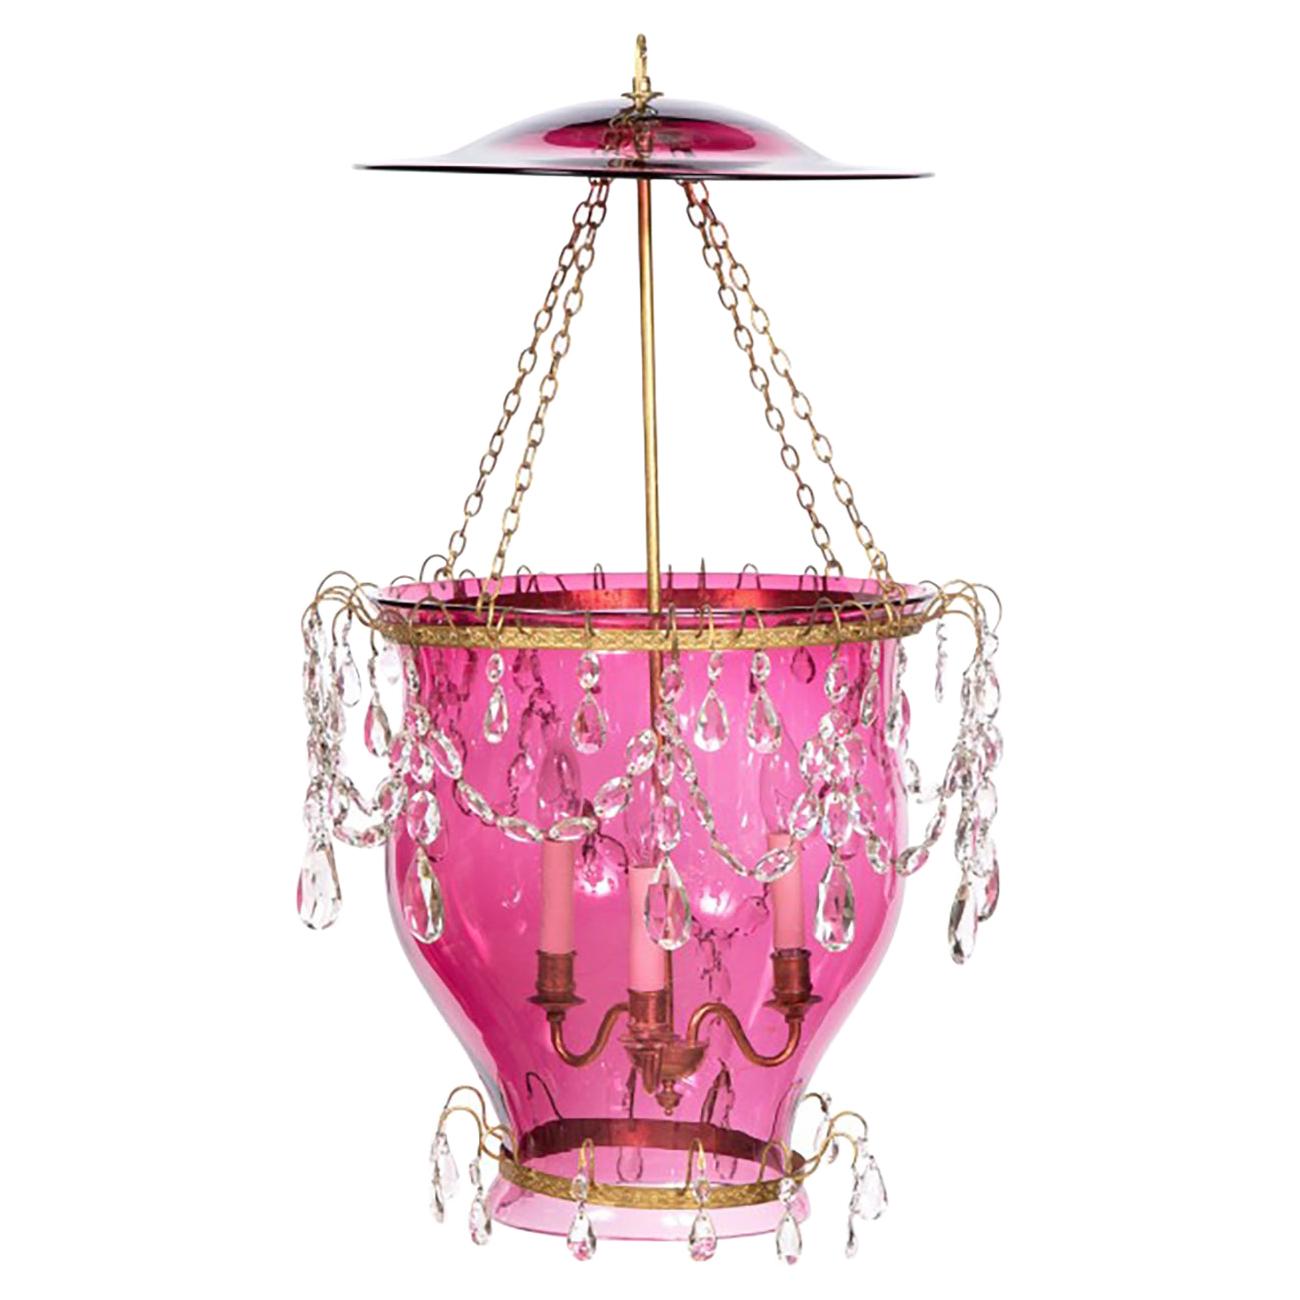 18th/19th Century Cranberry and Glass Lantern with Gilt Metal and Cut Glass For Sale